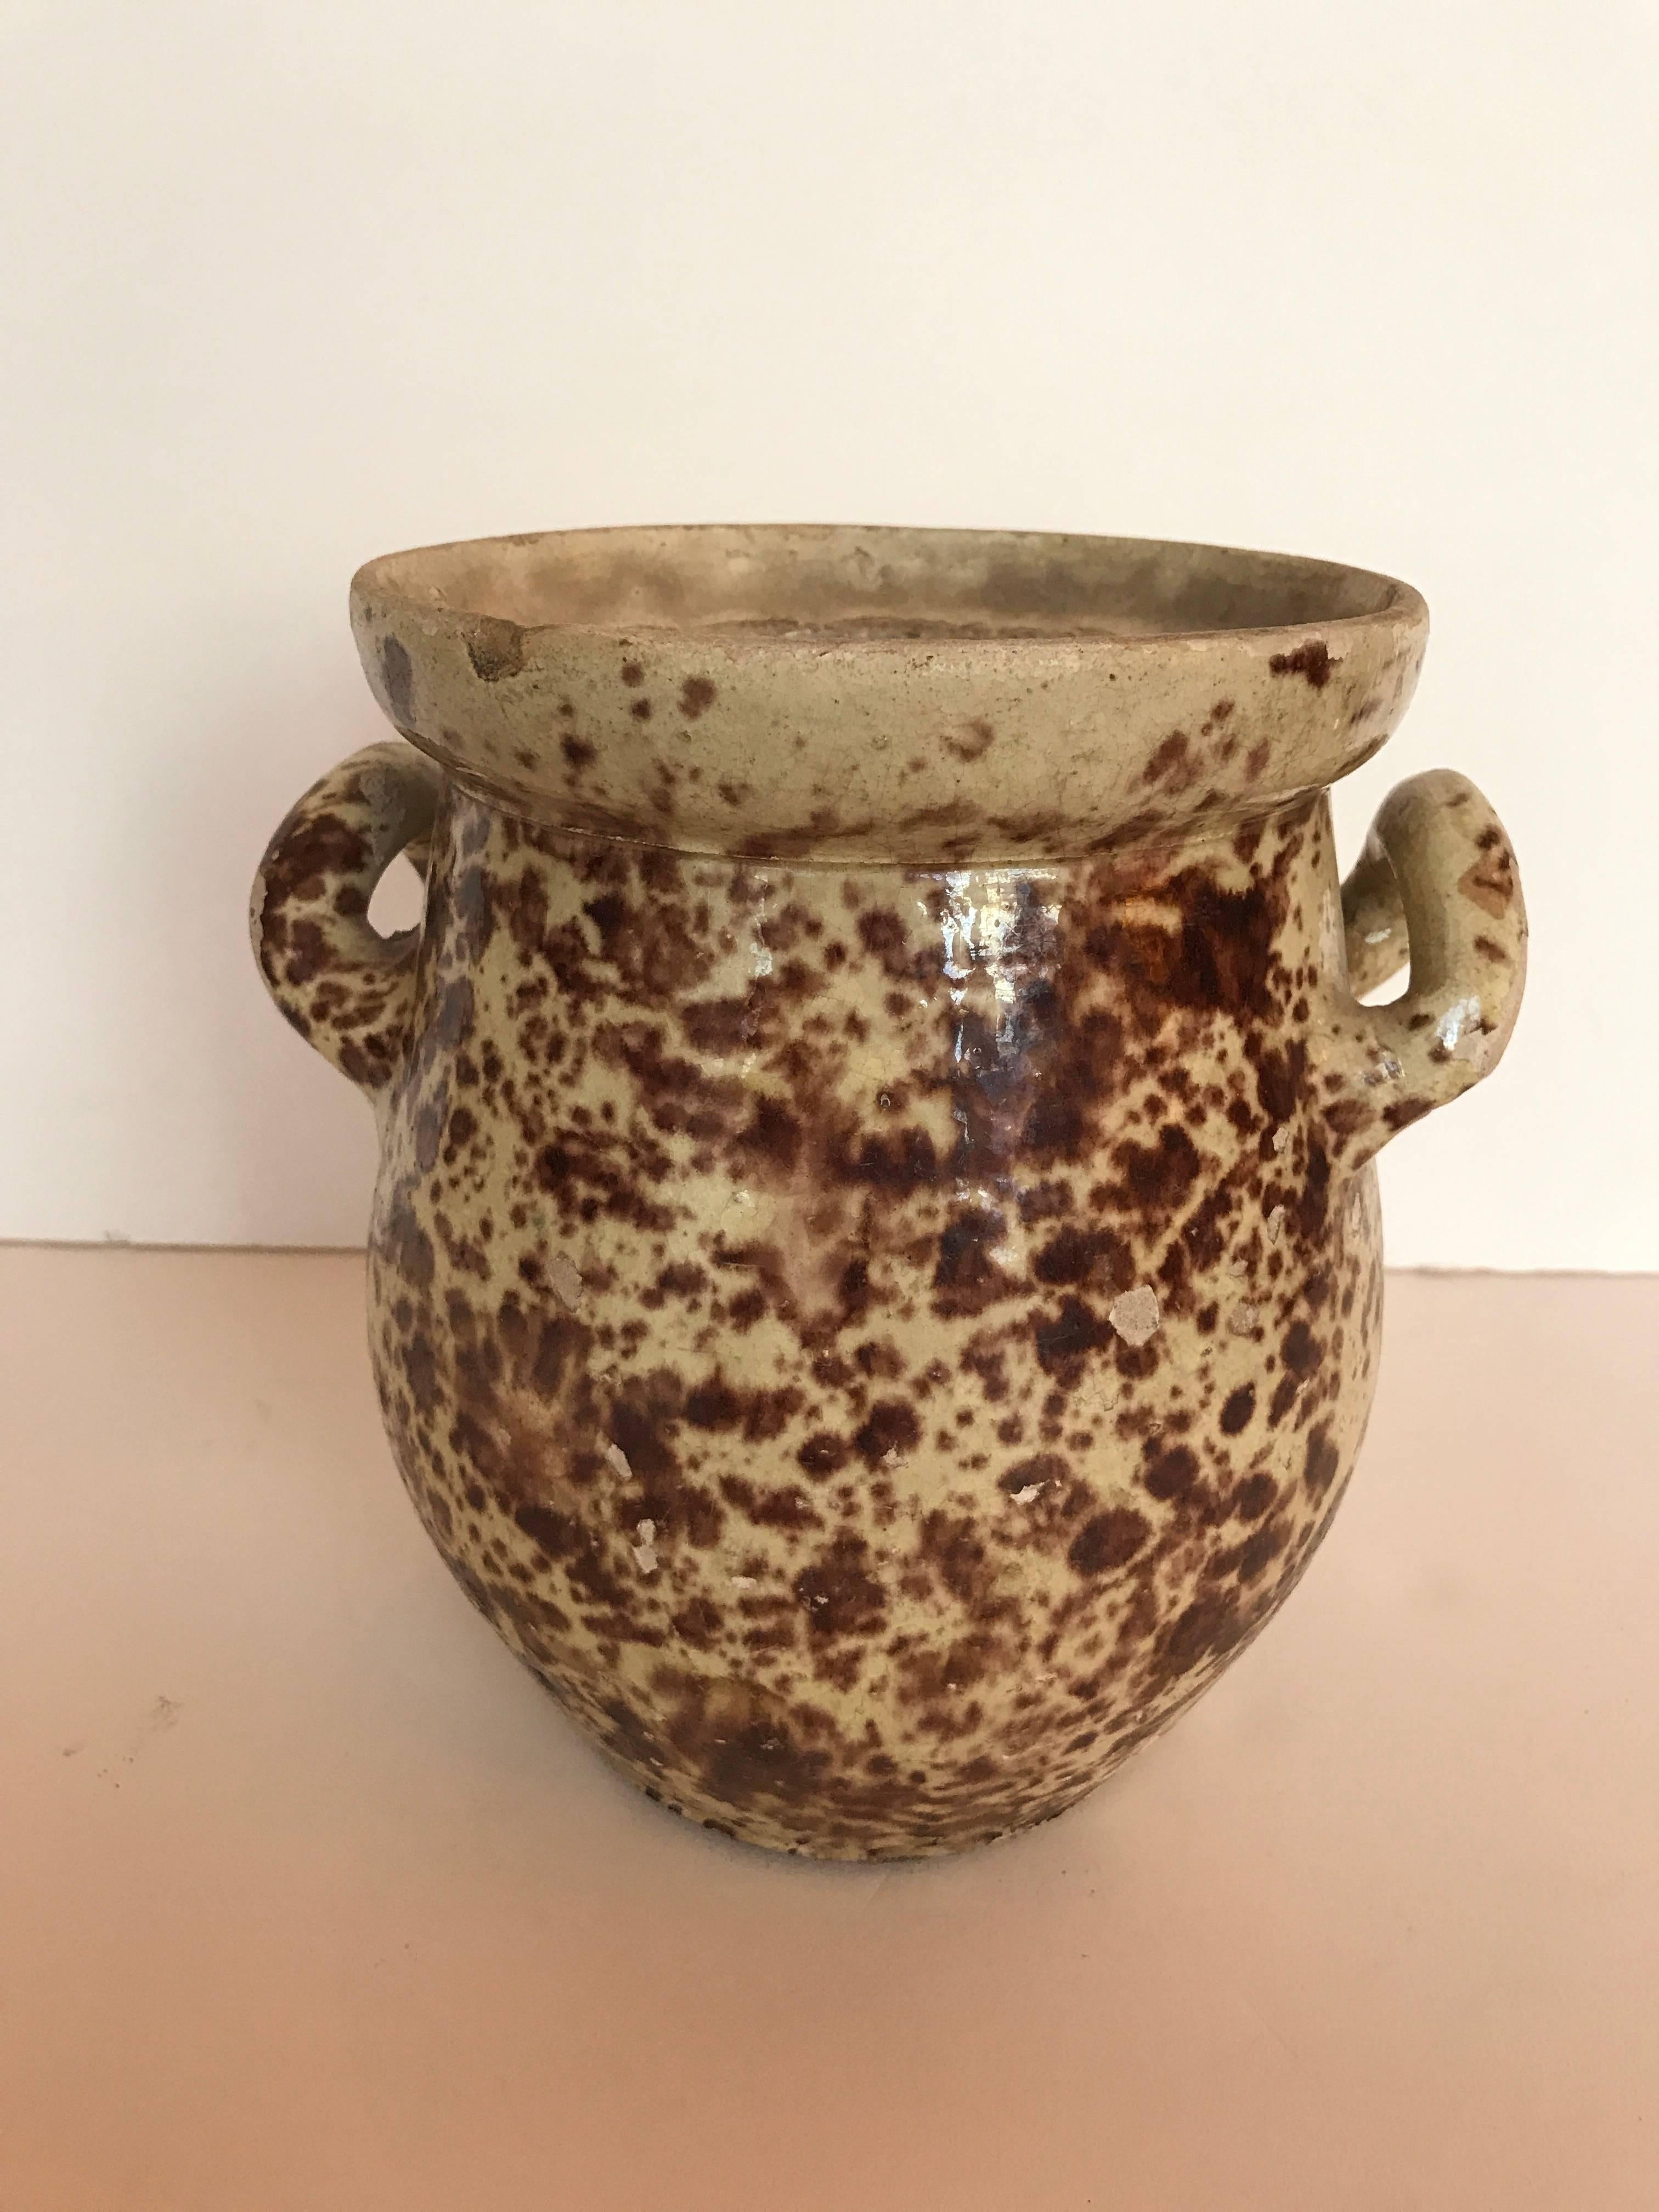 French Alsace antique pot with handles.  A wonderful folk art pottery example.  One of a kind for your collection.  Minimal flaking on handles, along top rim and small flakes on body of pot but nothing too disturbing for the age of the piece. 